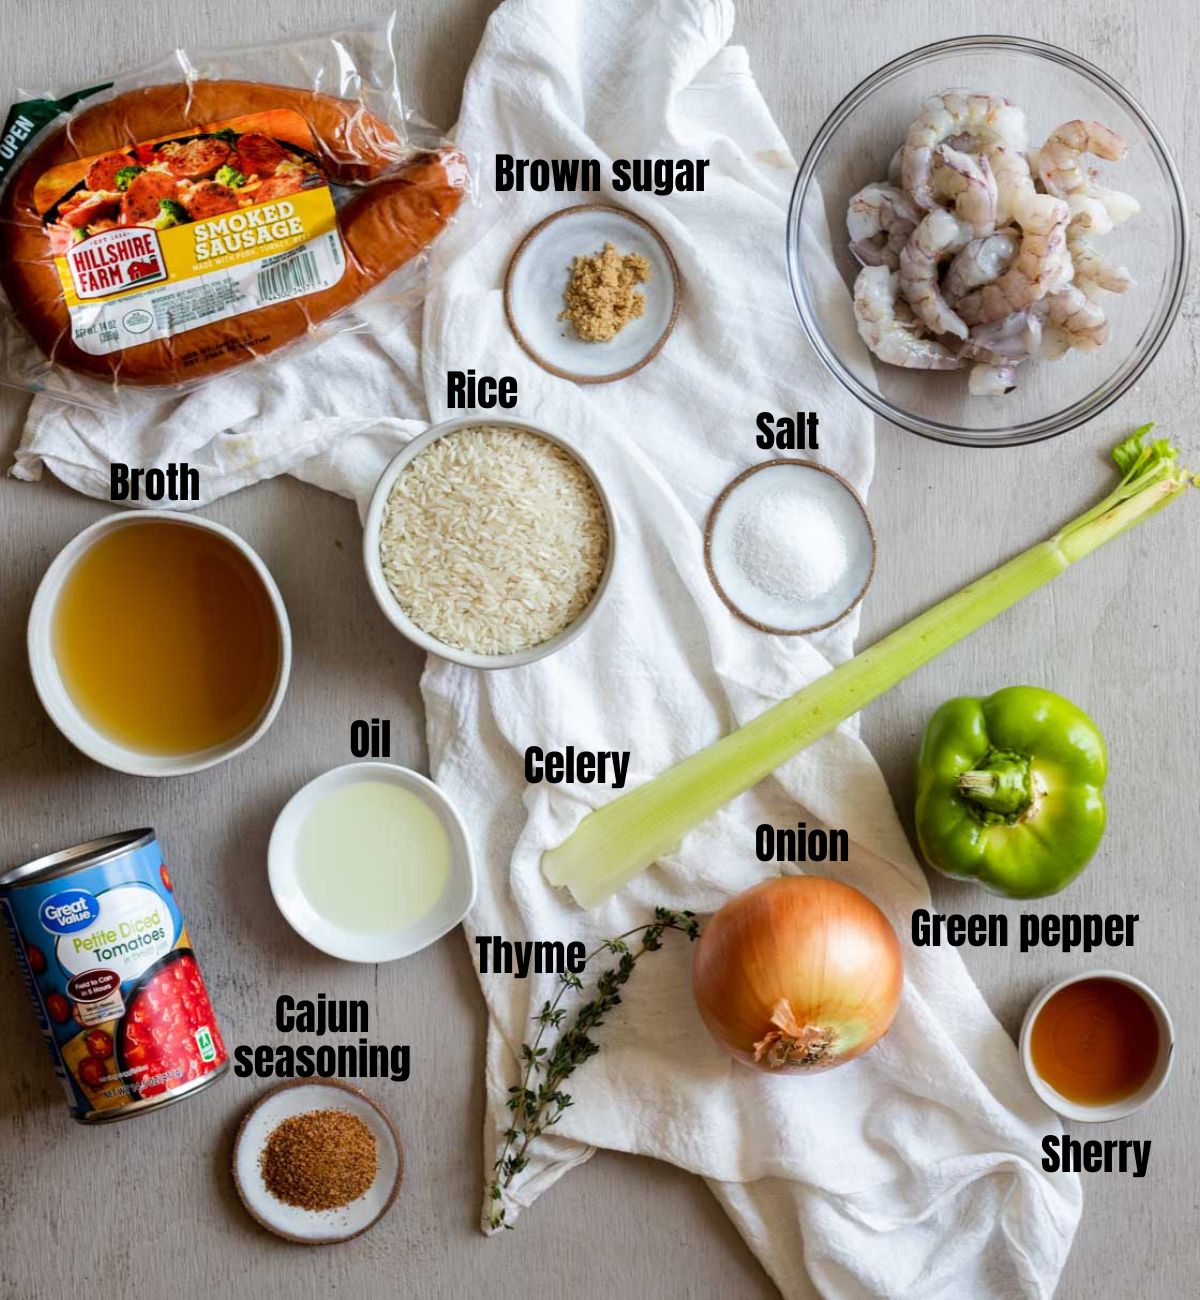 Ingredients to make Instant Pot jambalaya arranged individually and labelled.